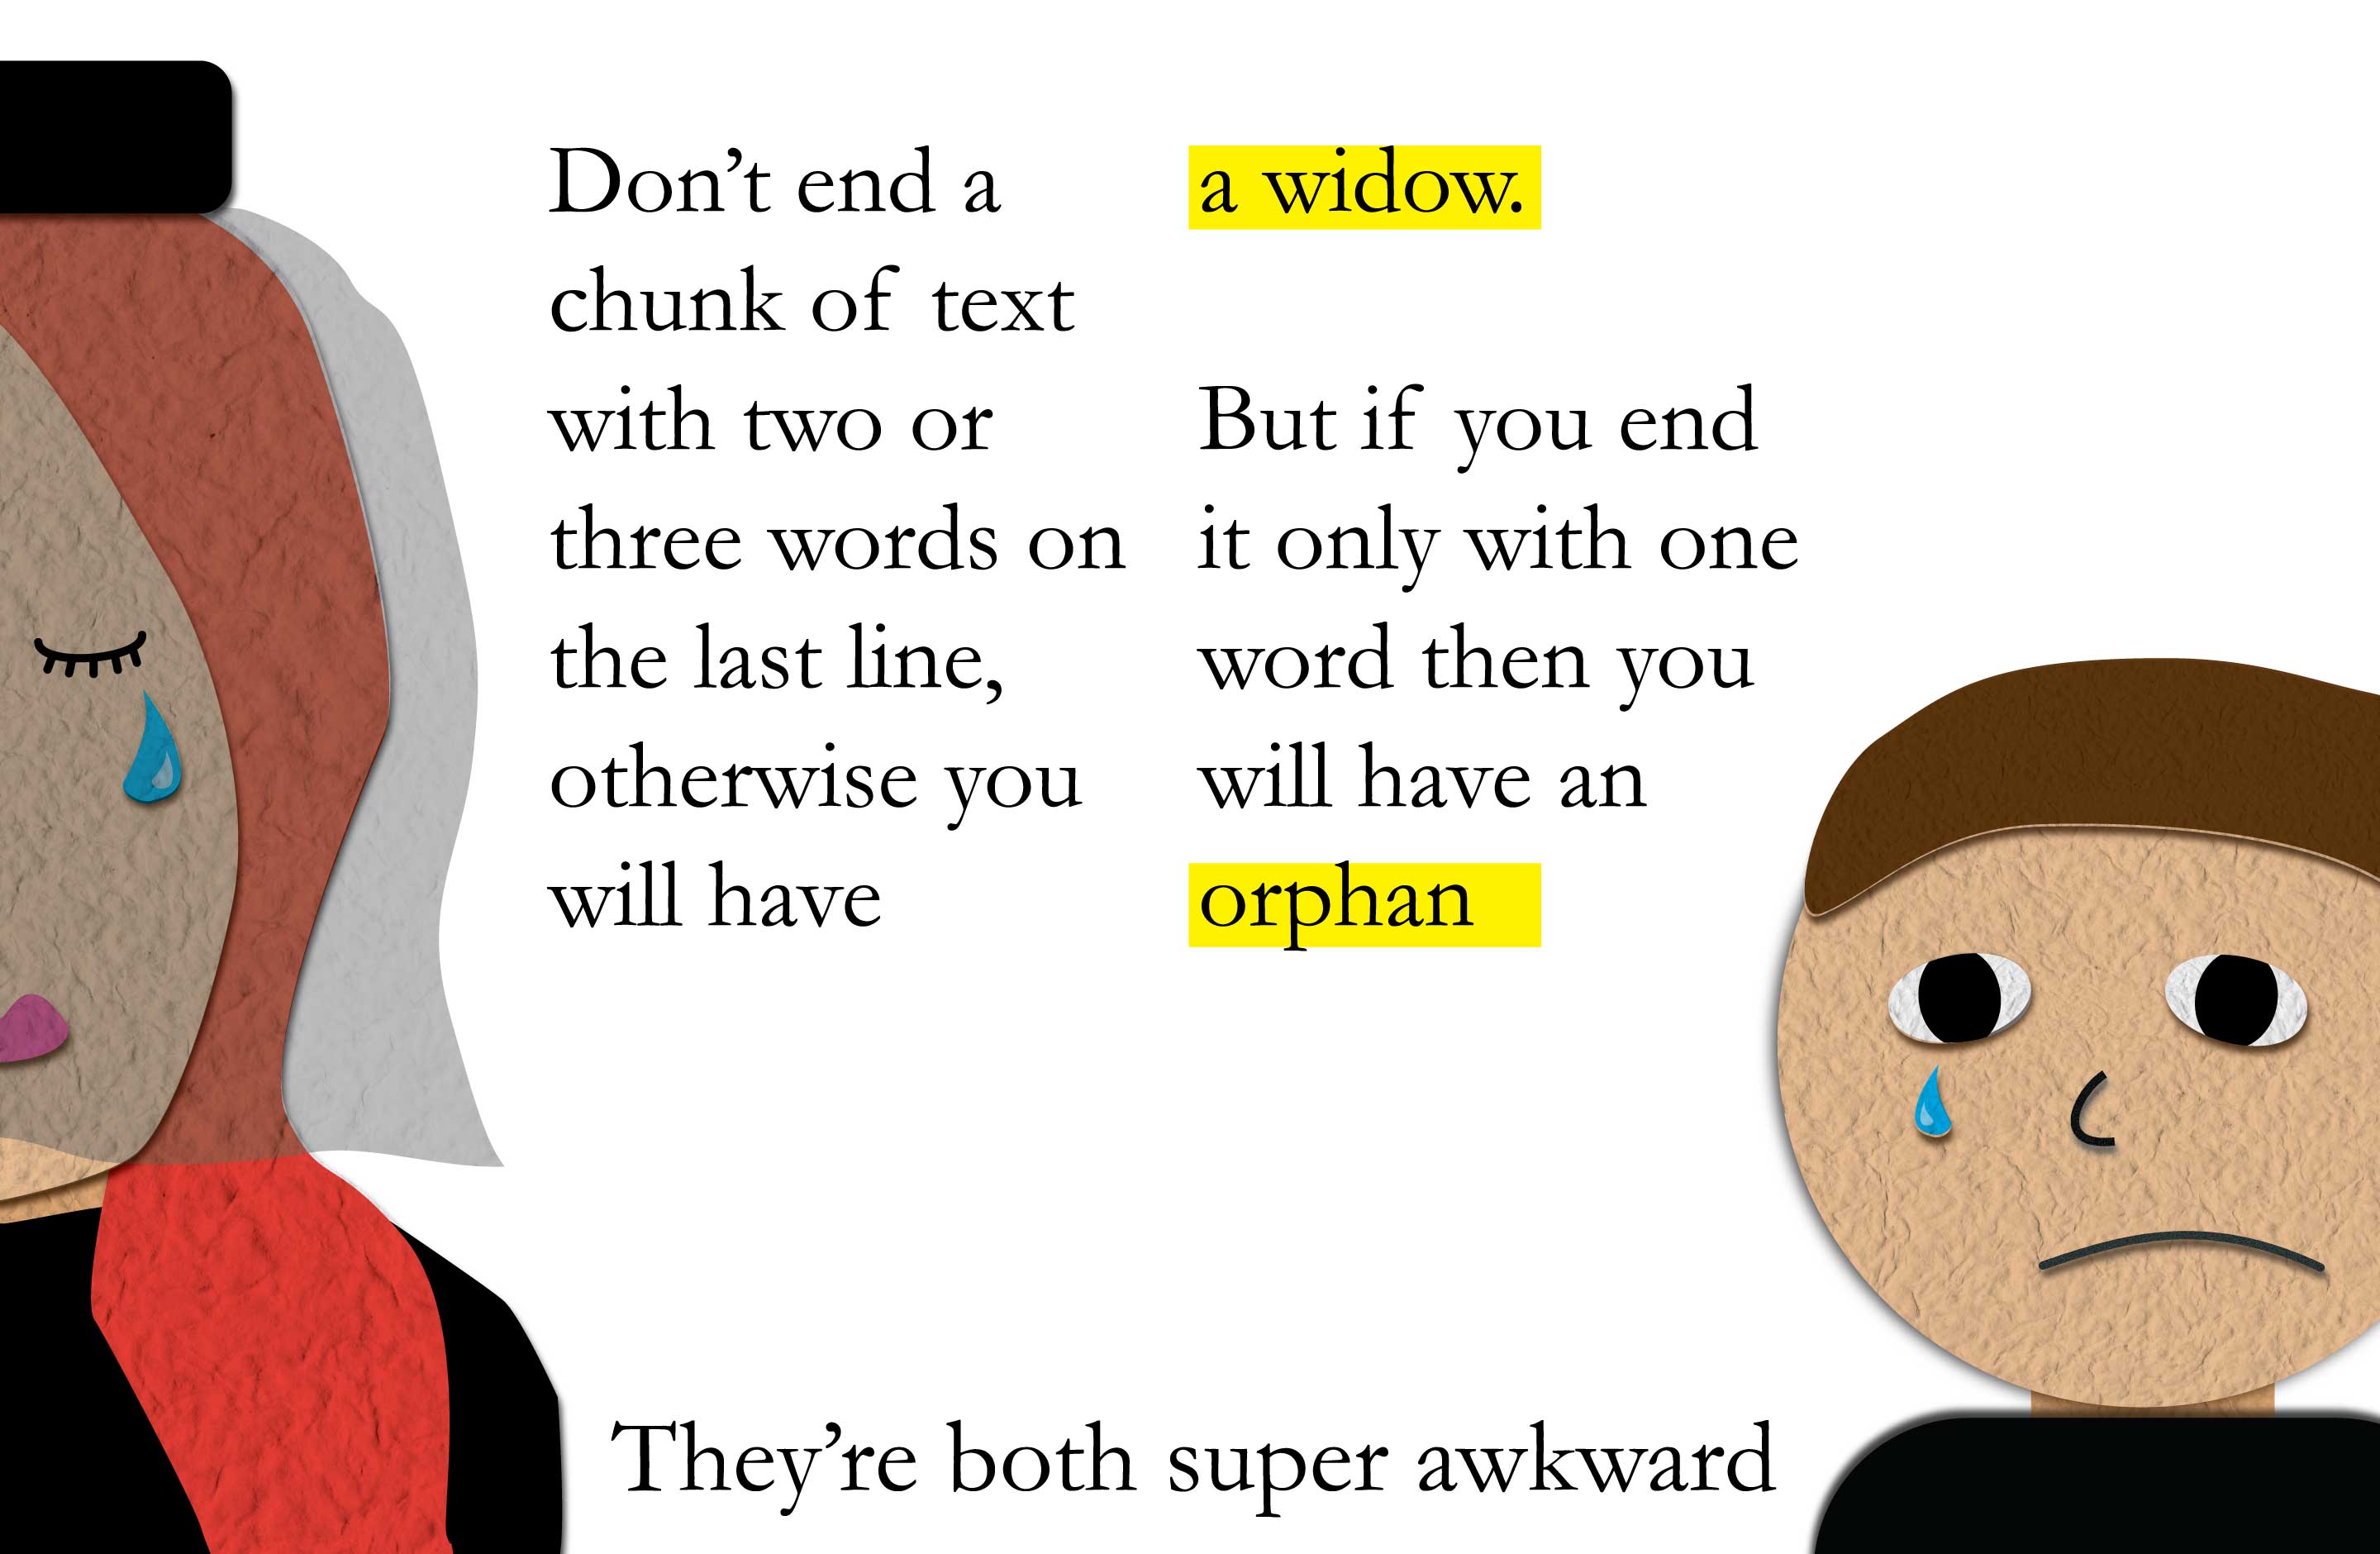 widow and orphan control for word on mac 2011